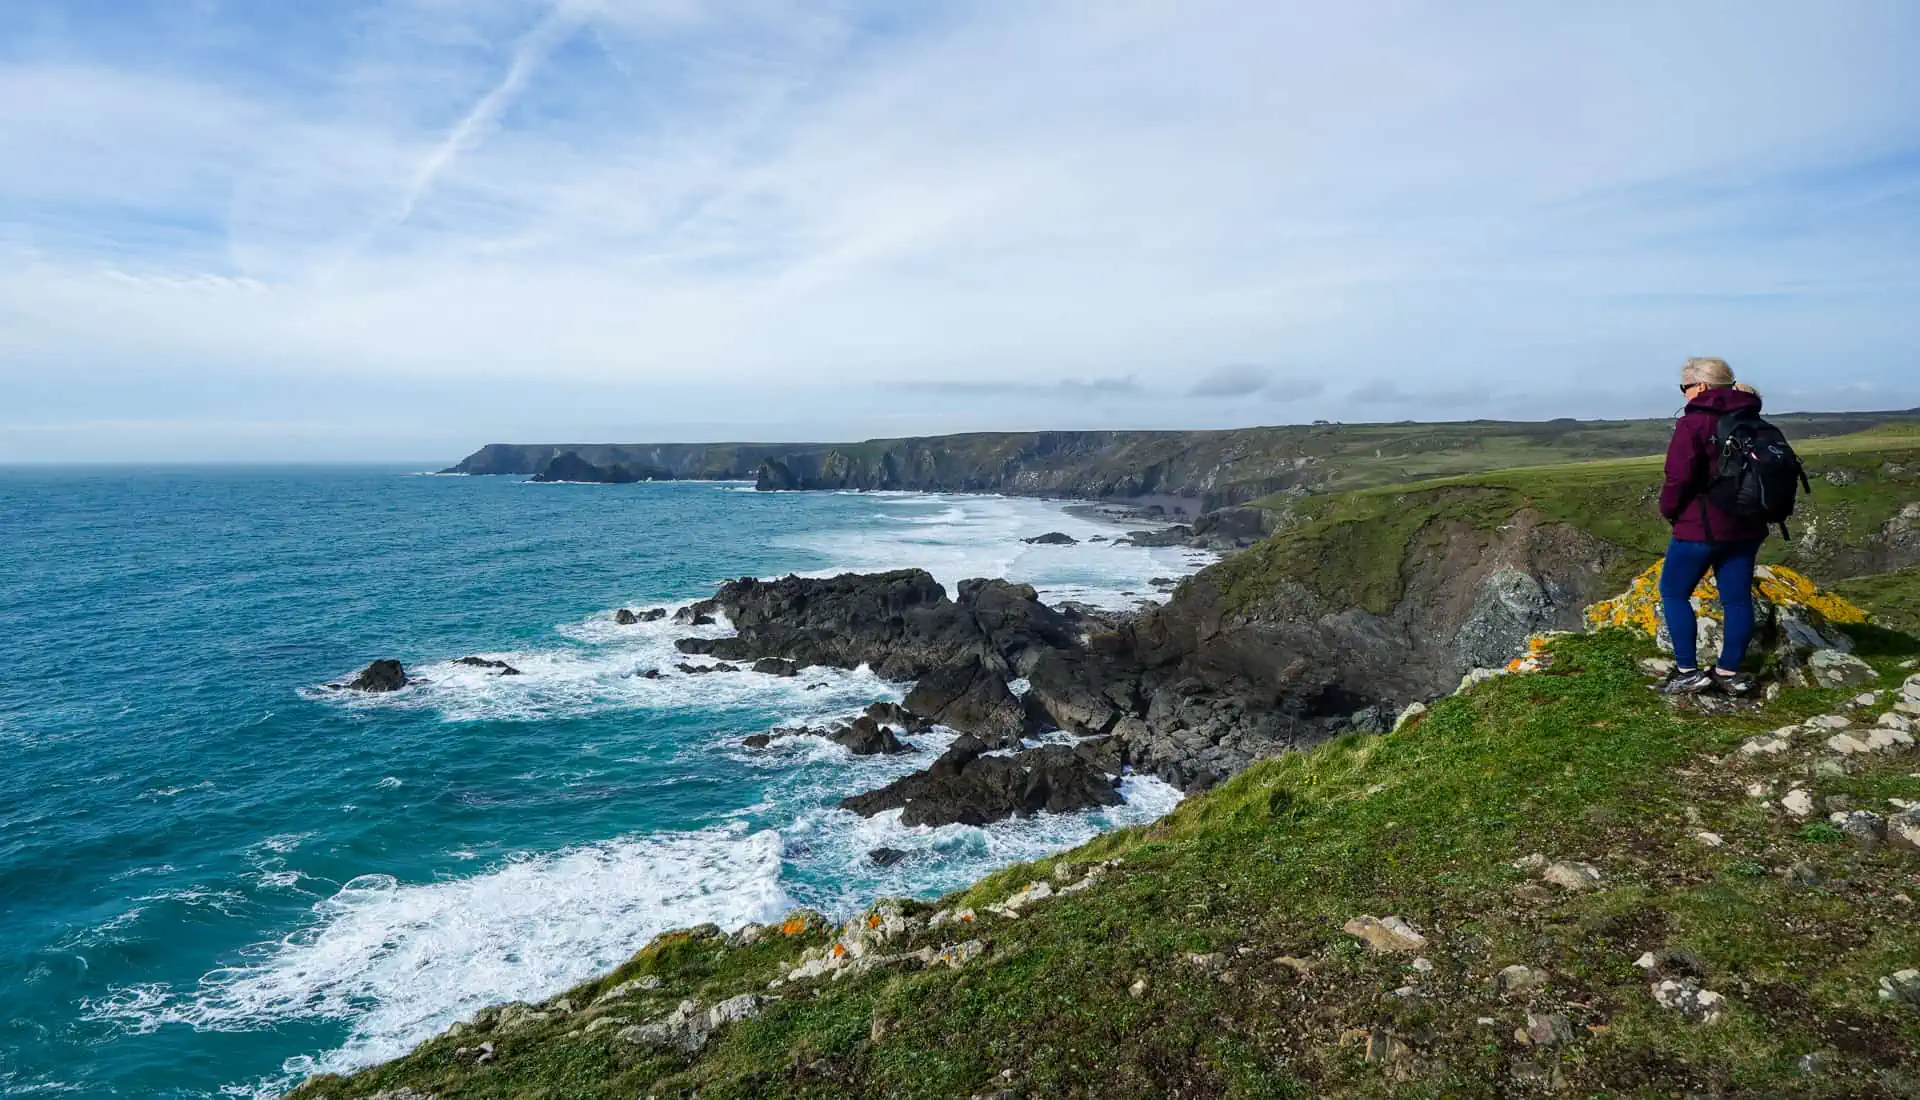 A person looks out over cliffs and ocean of the Cornwall coastline.